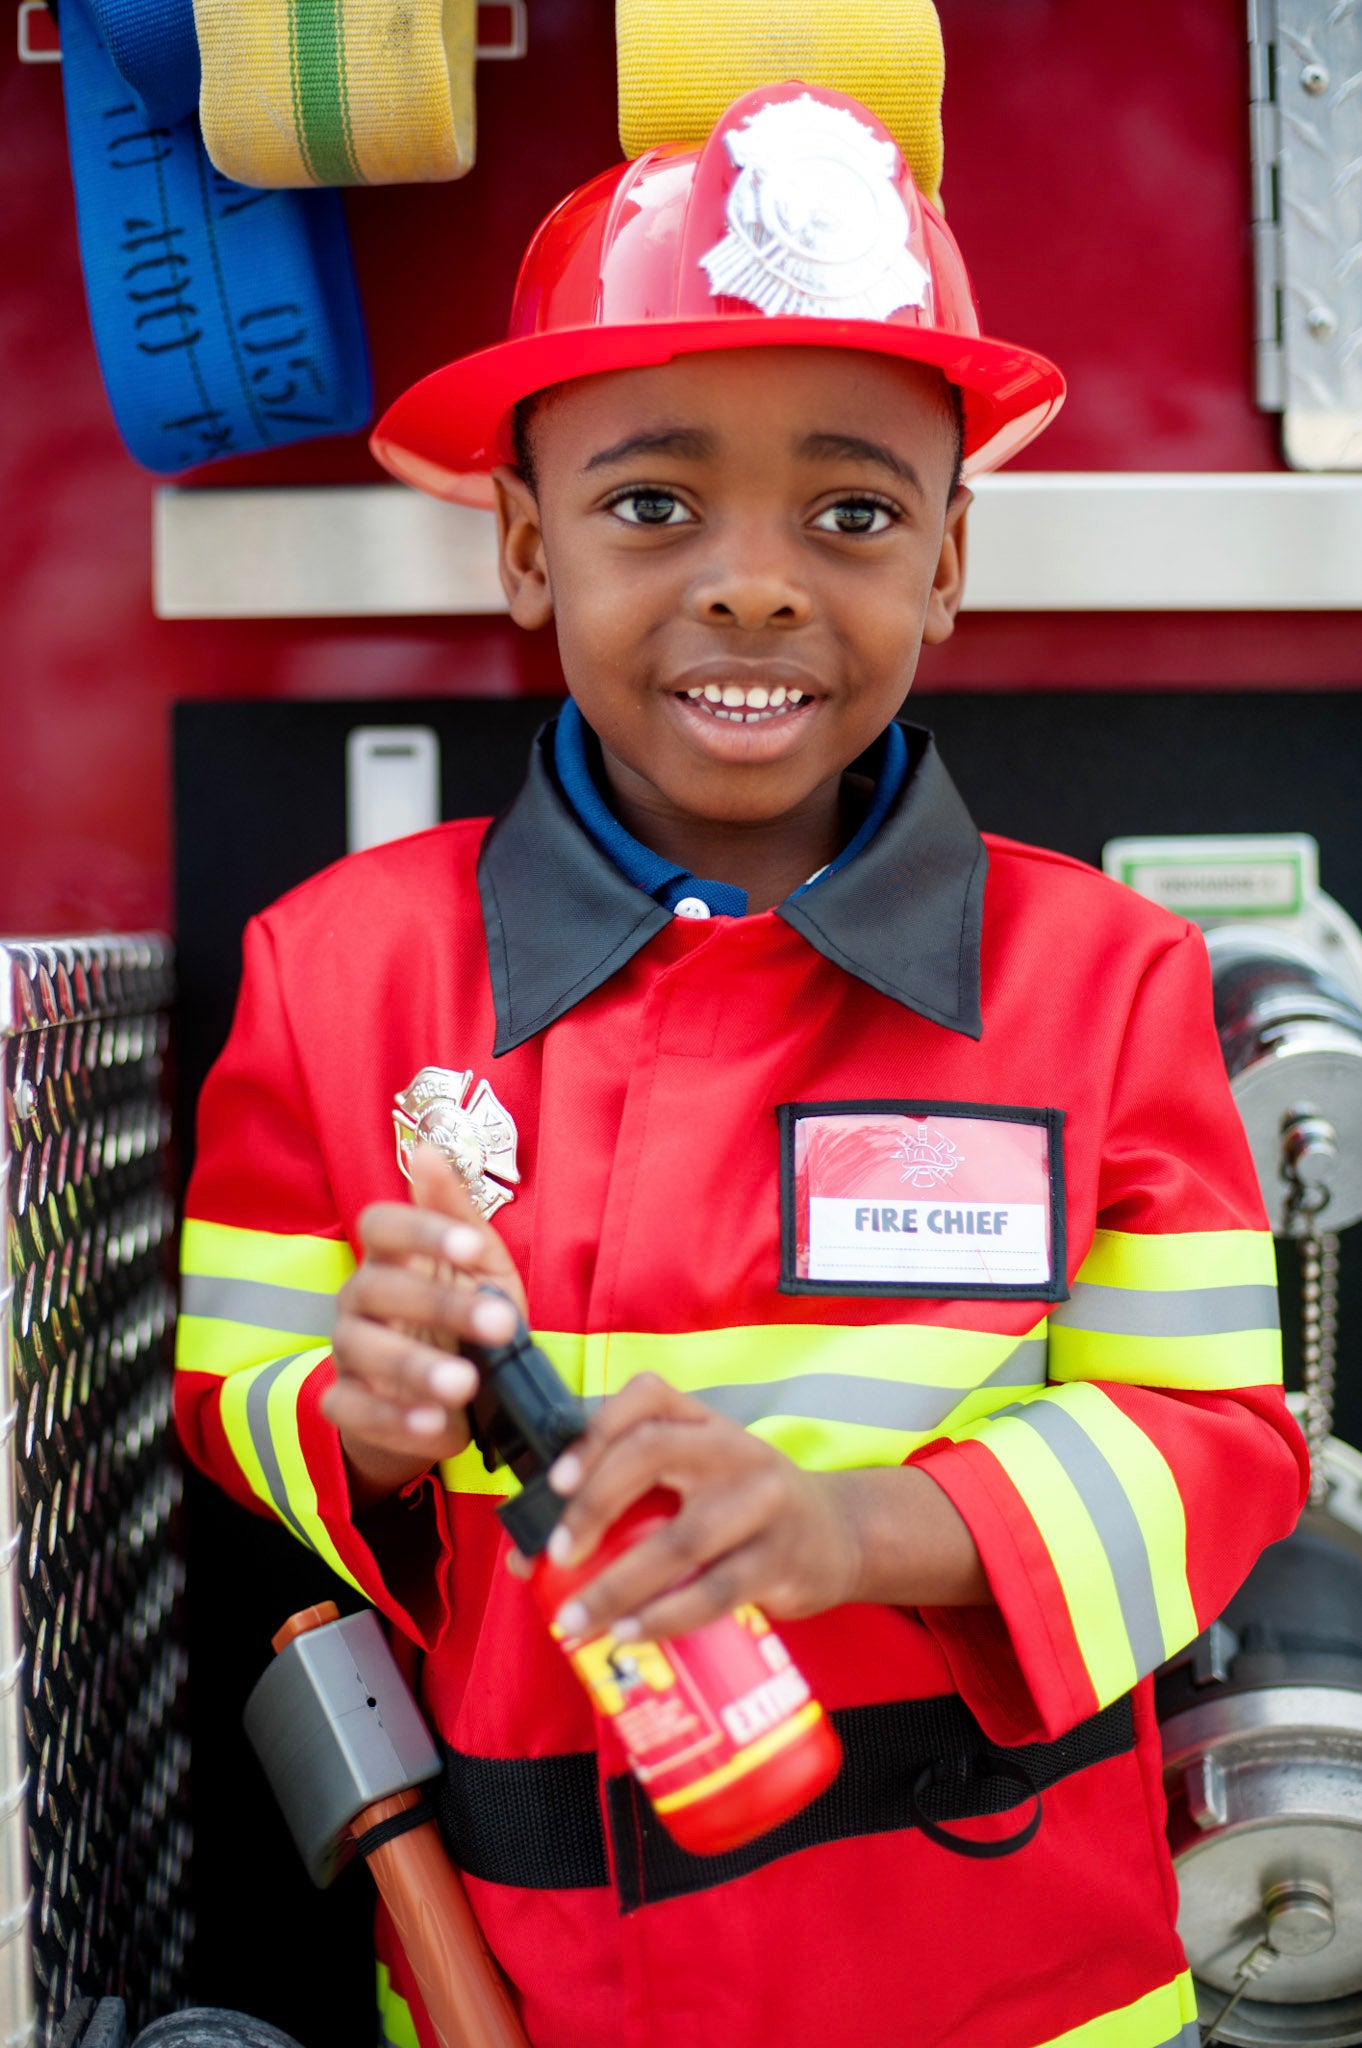 Fireman Outfit – Hobby and Toy Central